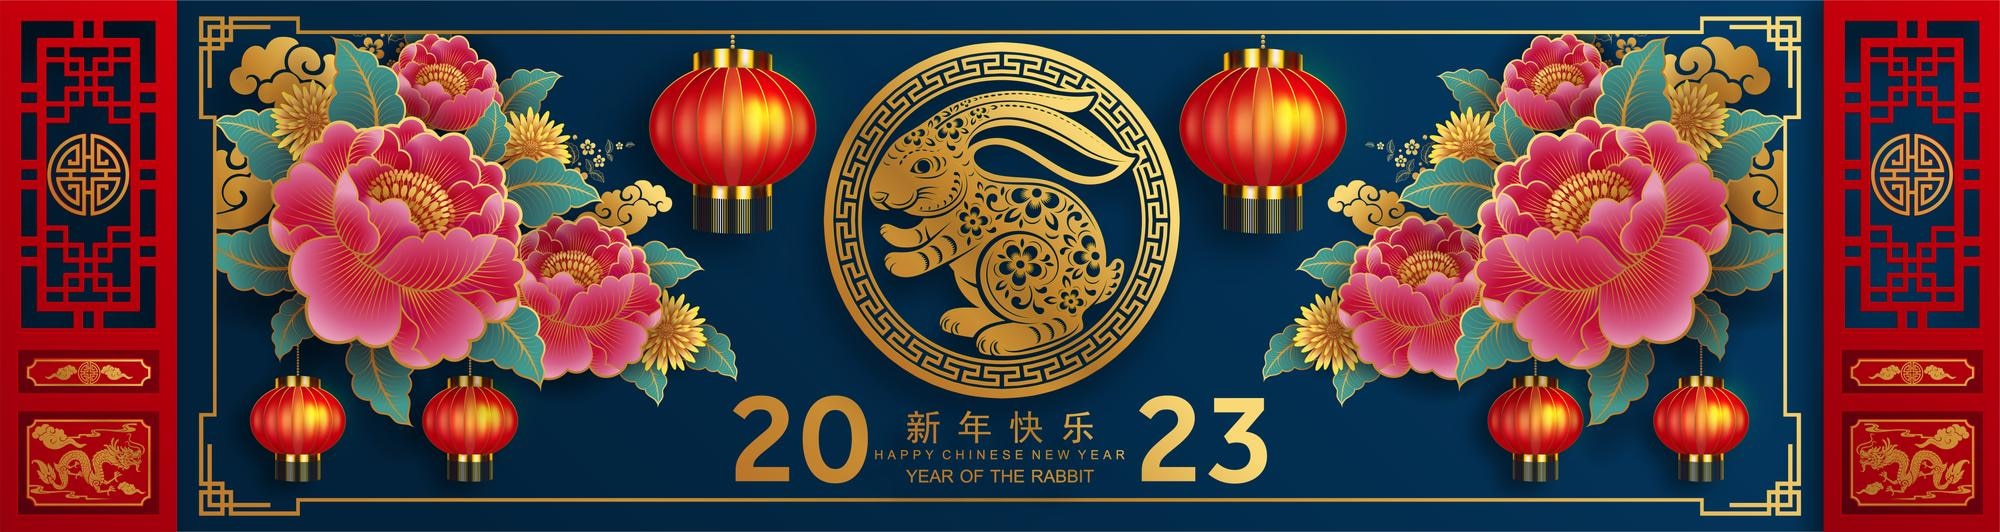 Chinese new year 2023 Image. Free Vectors, & PSD